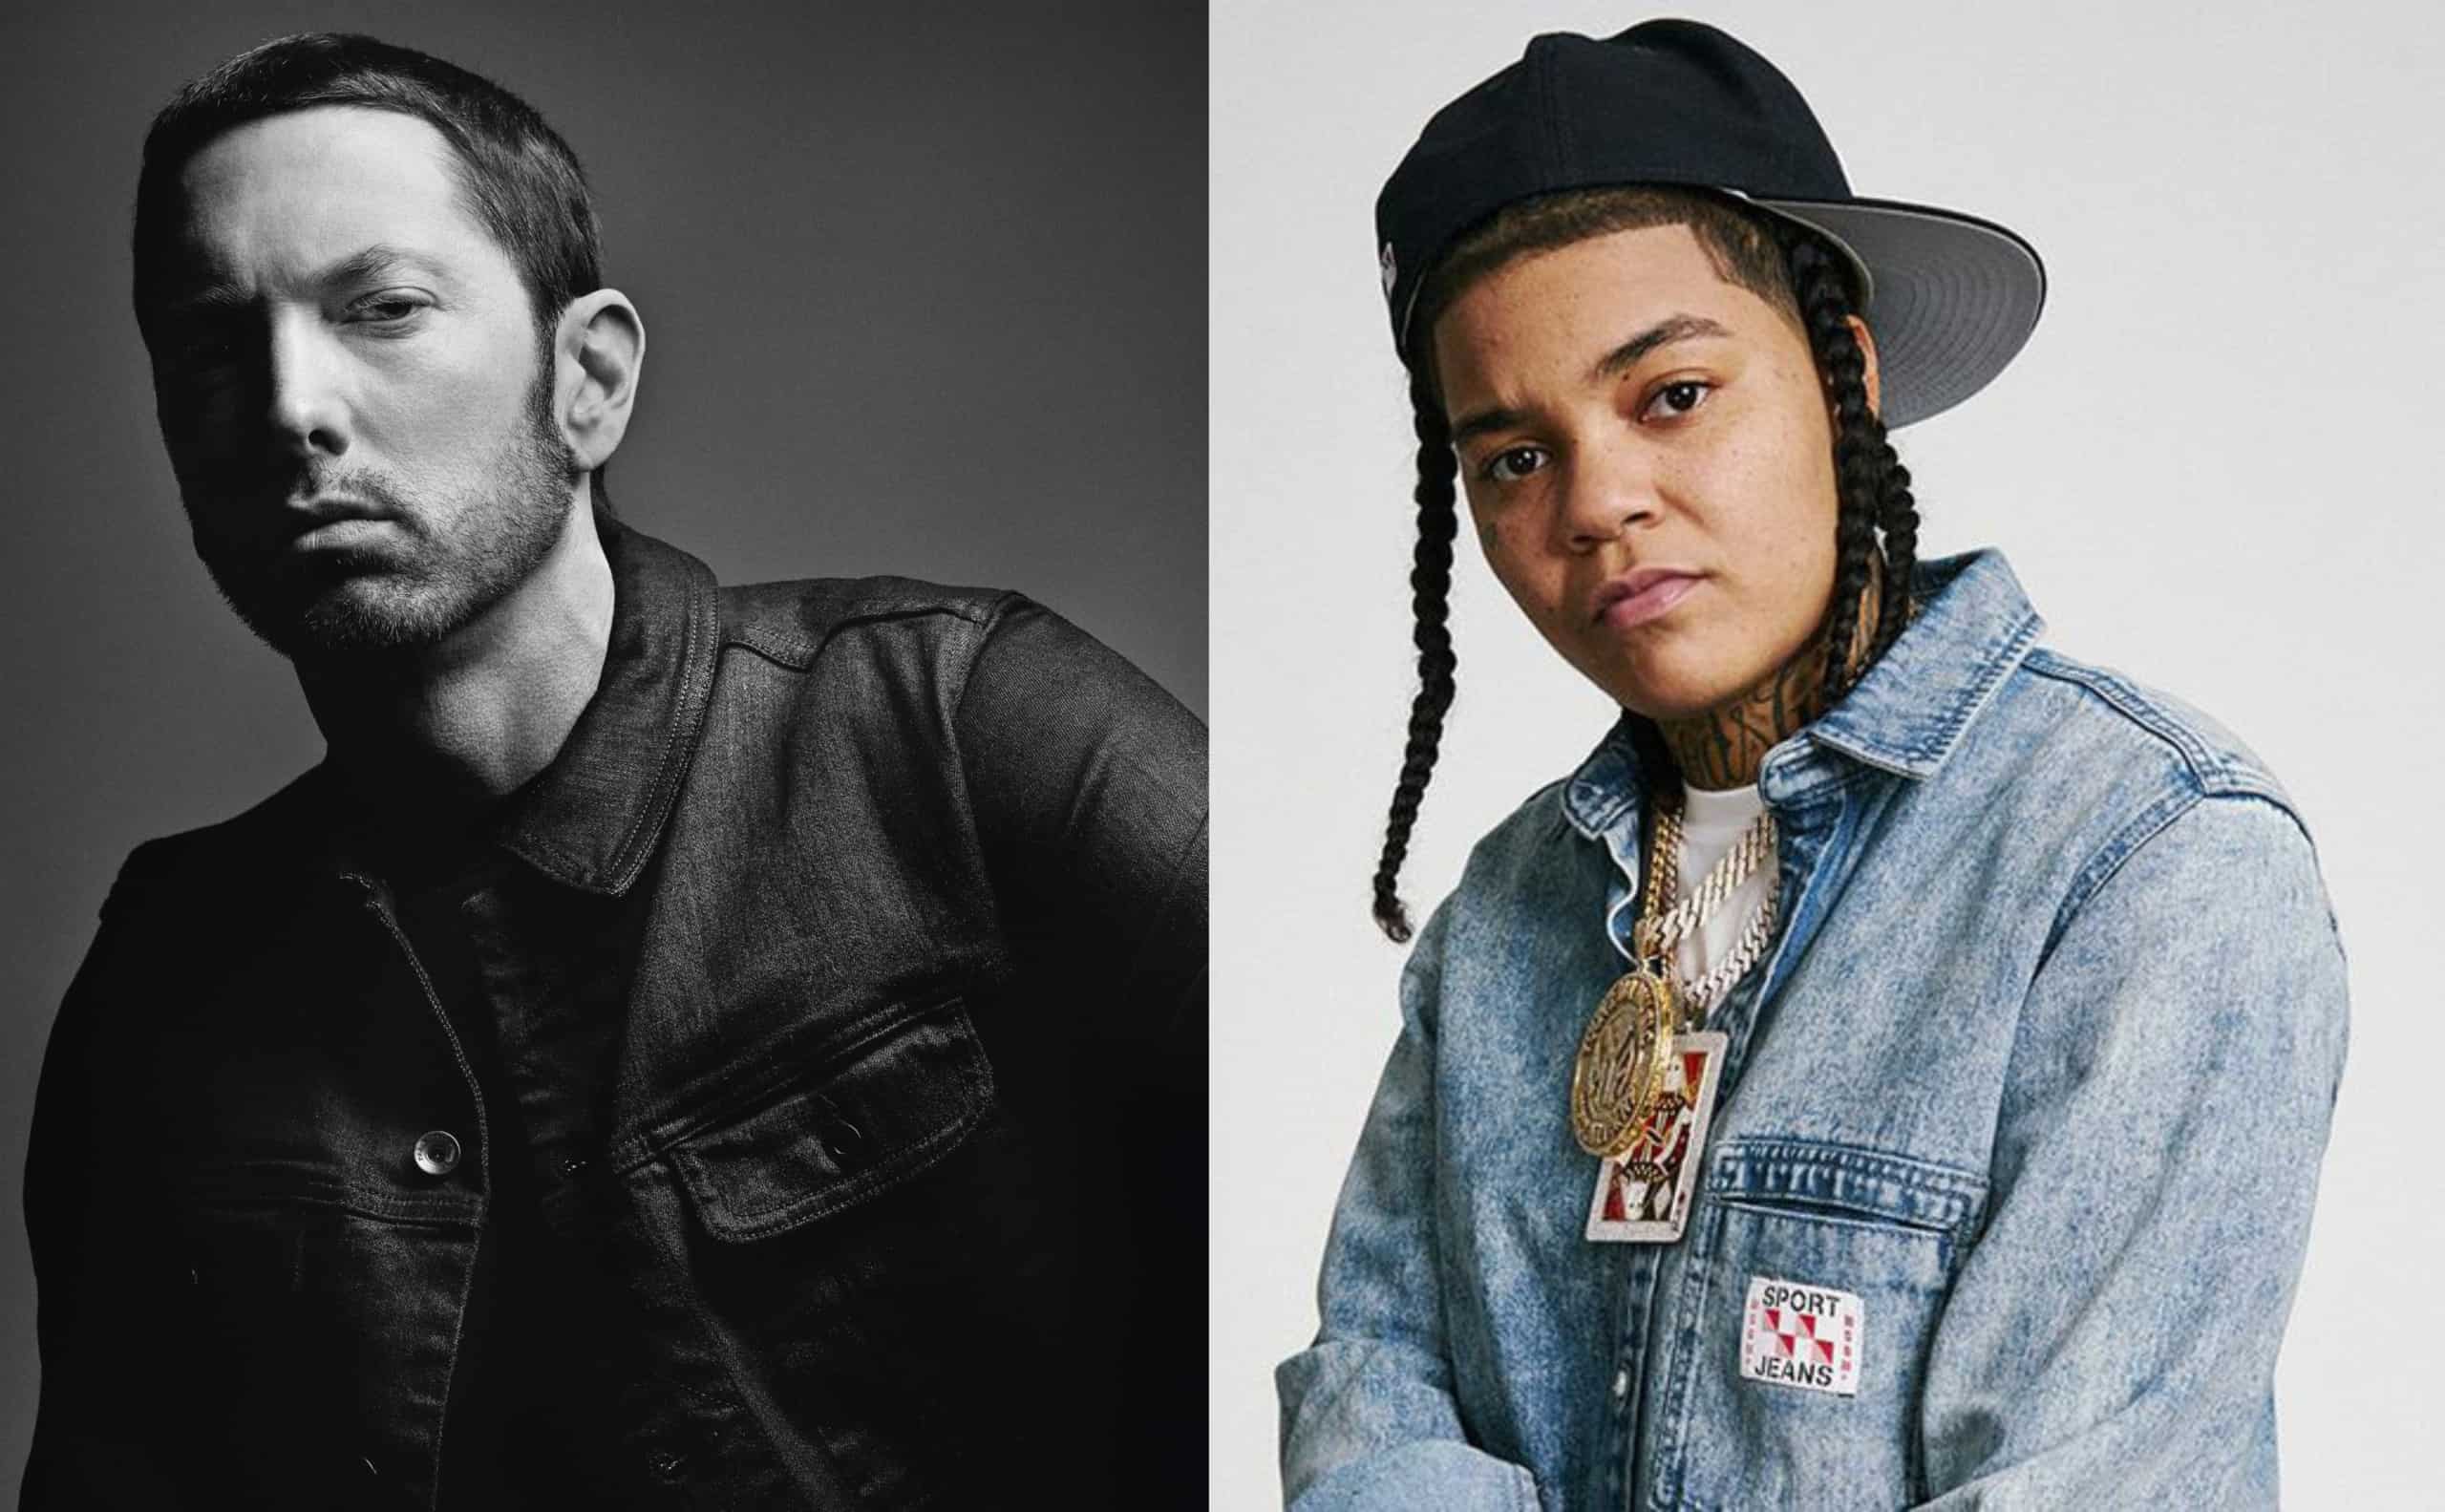 Young M.A Talked About Working with Eminem He Was Very Humble As I Expected